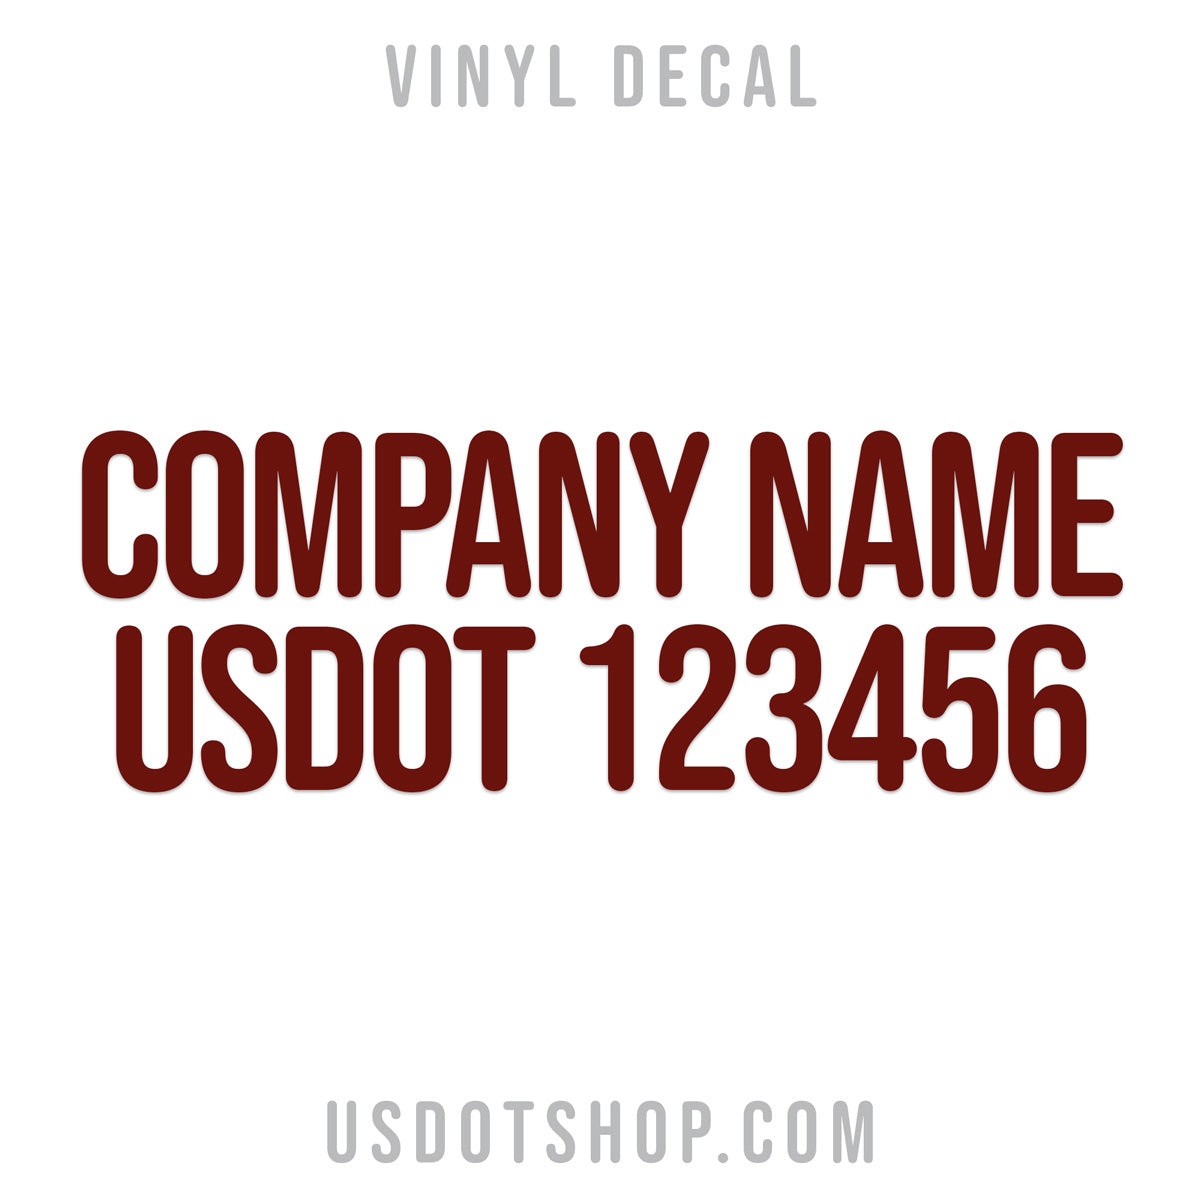 company name decal with usdot